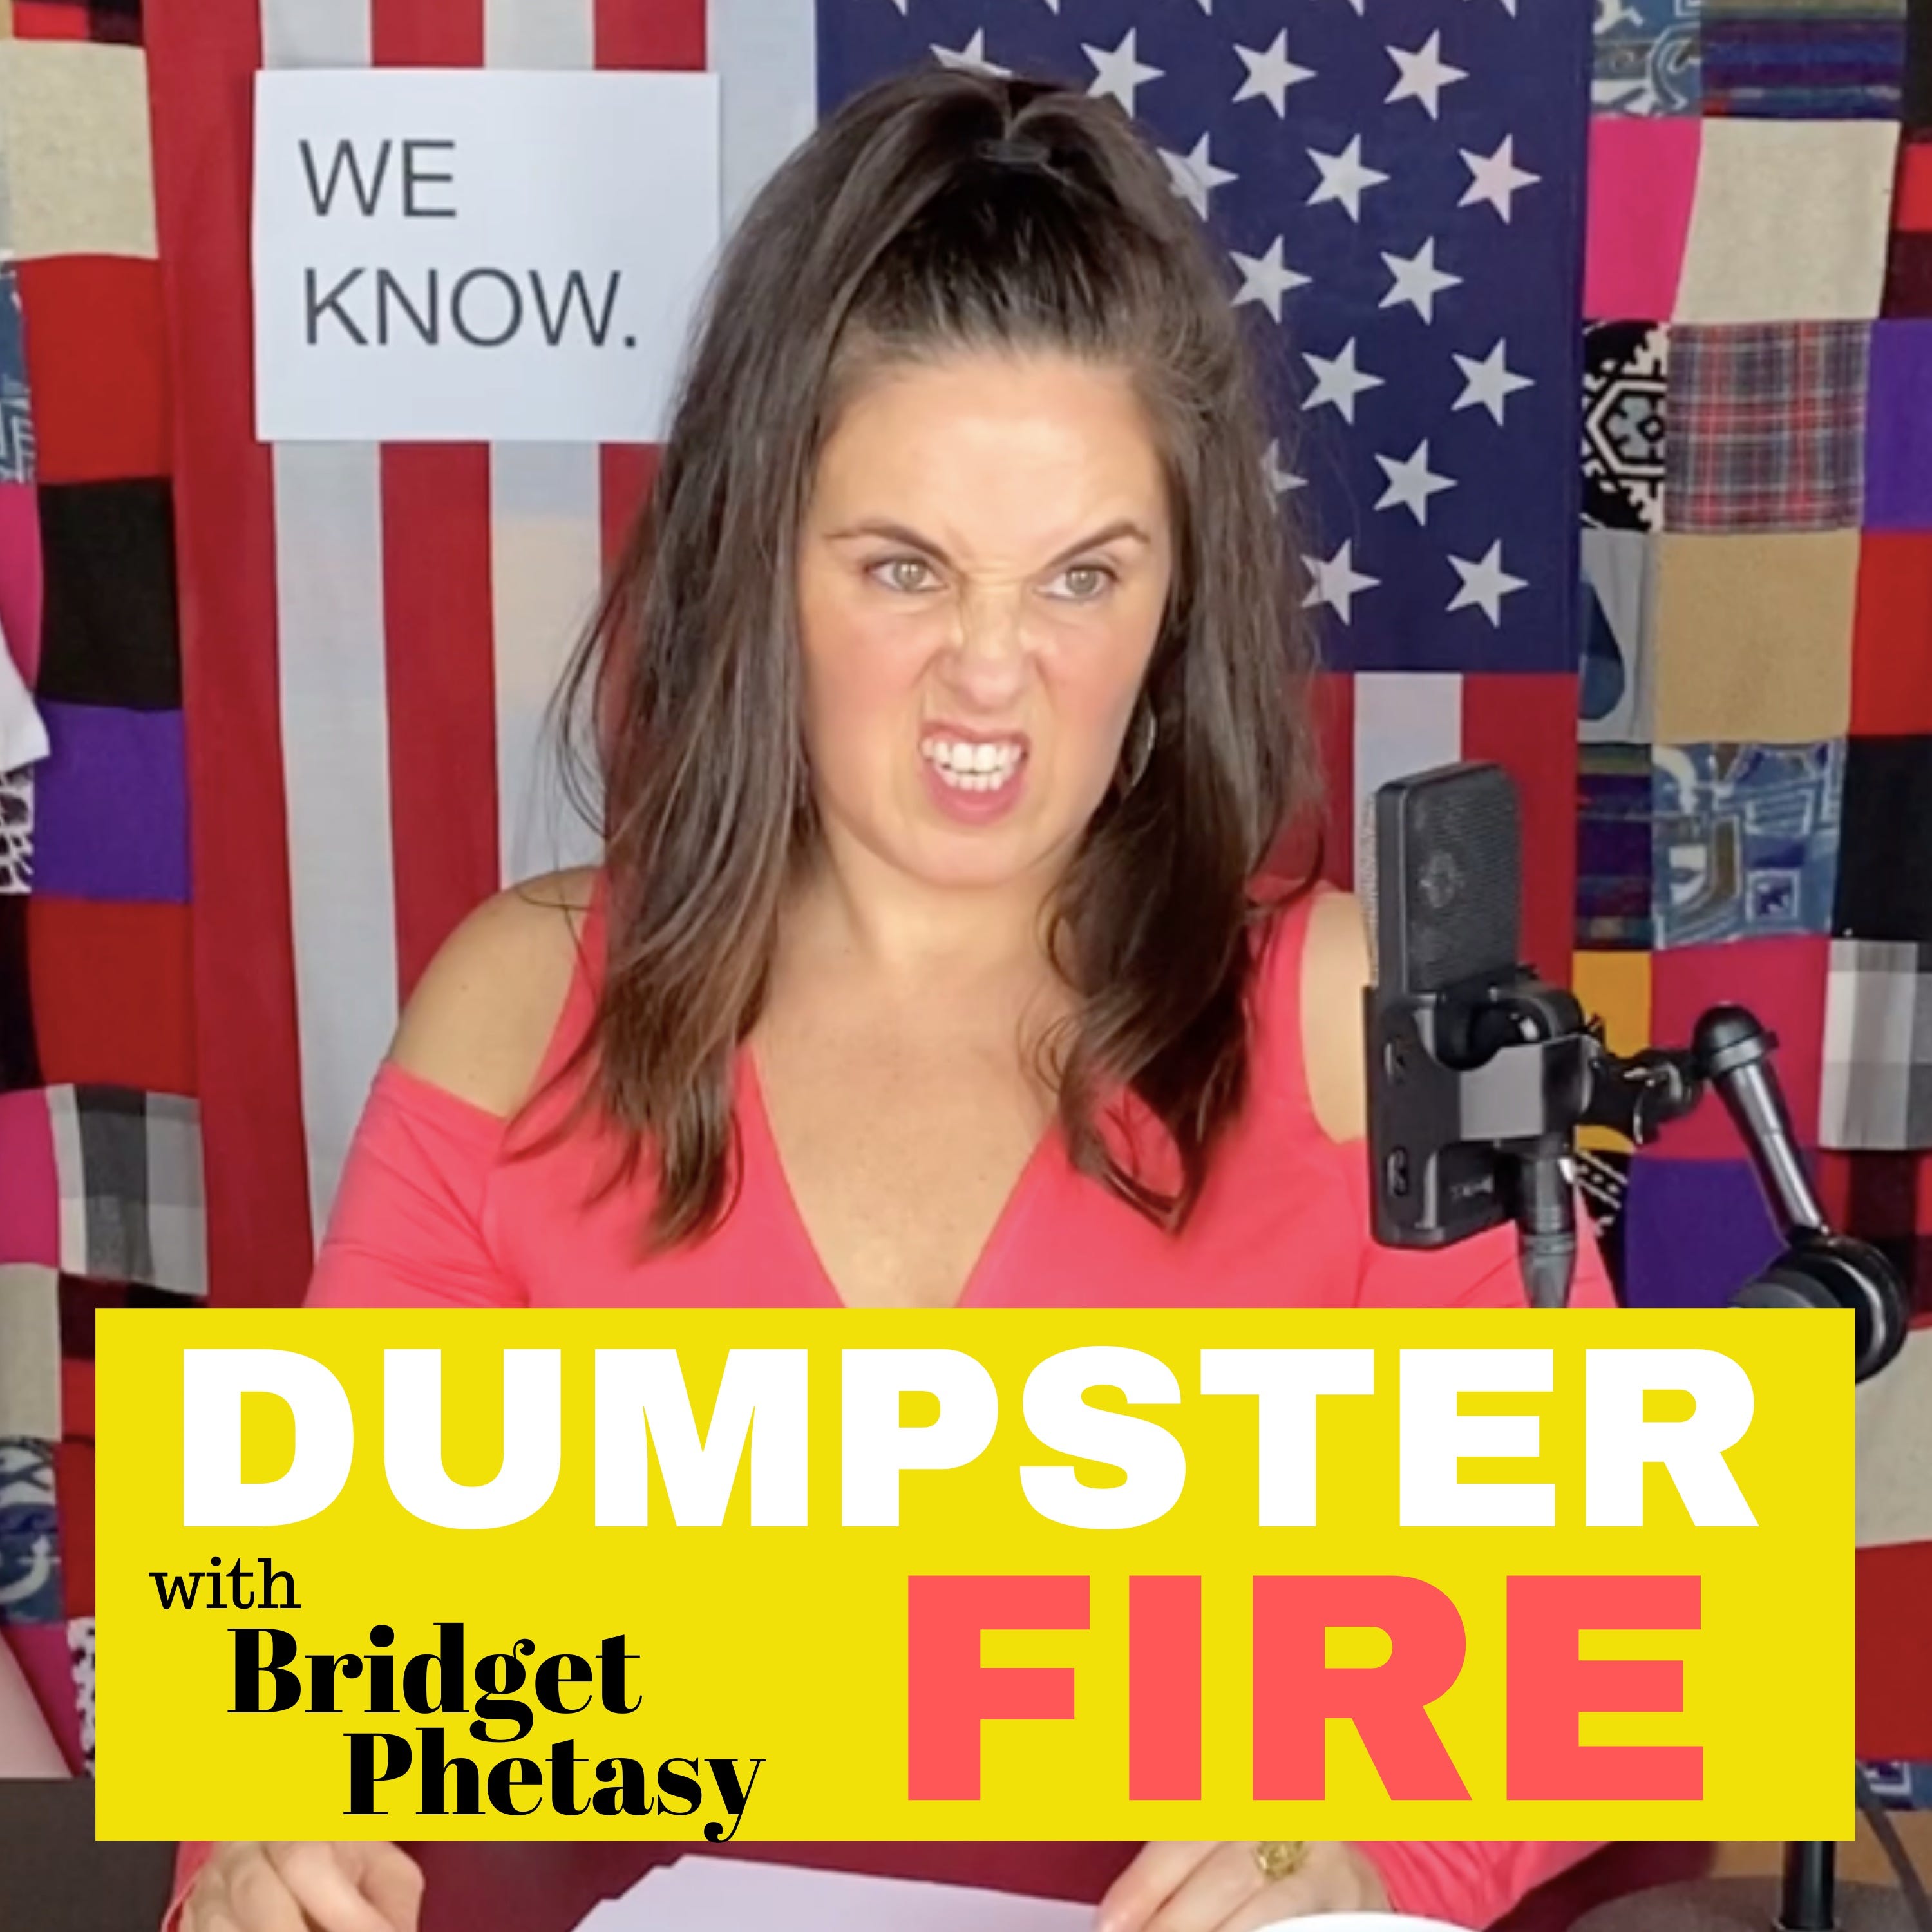 Dumpster Fire 26 - The Pandering Will Continue Until Morale Improves